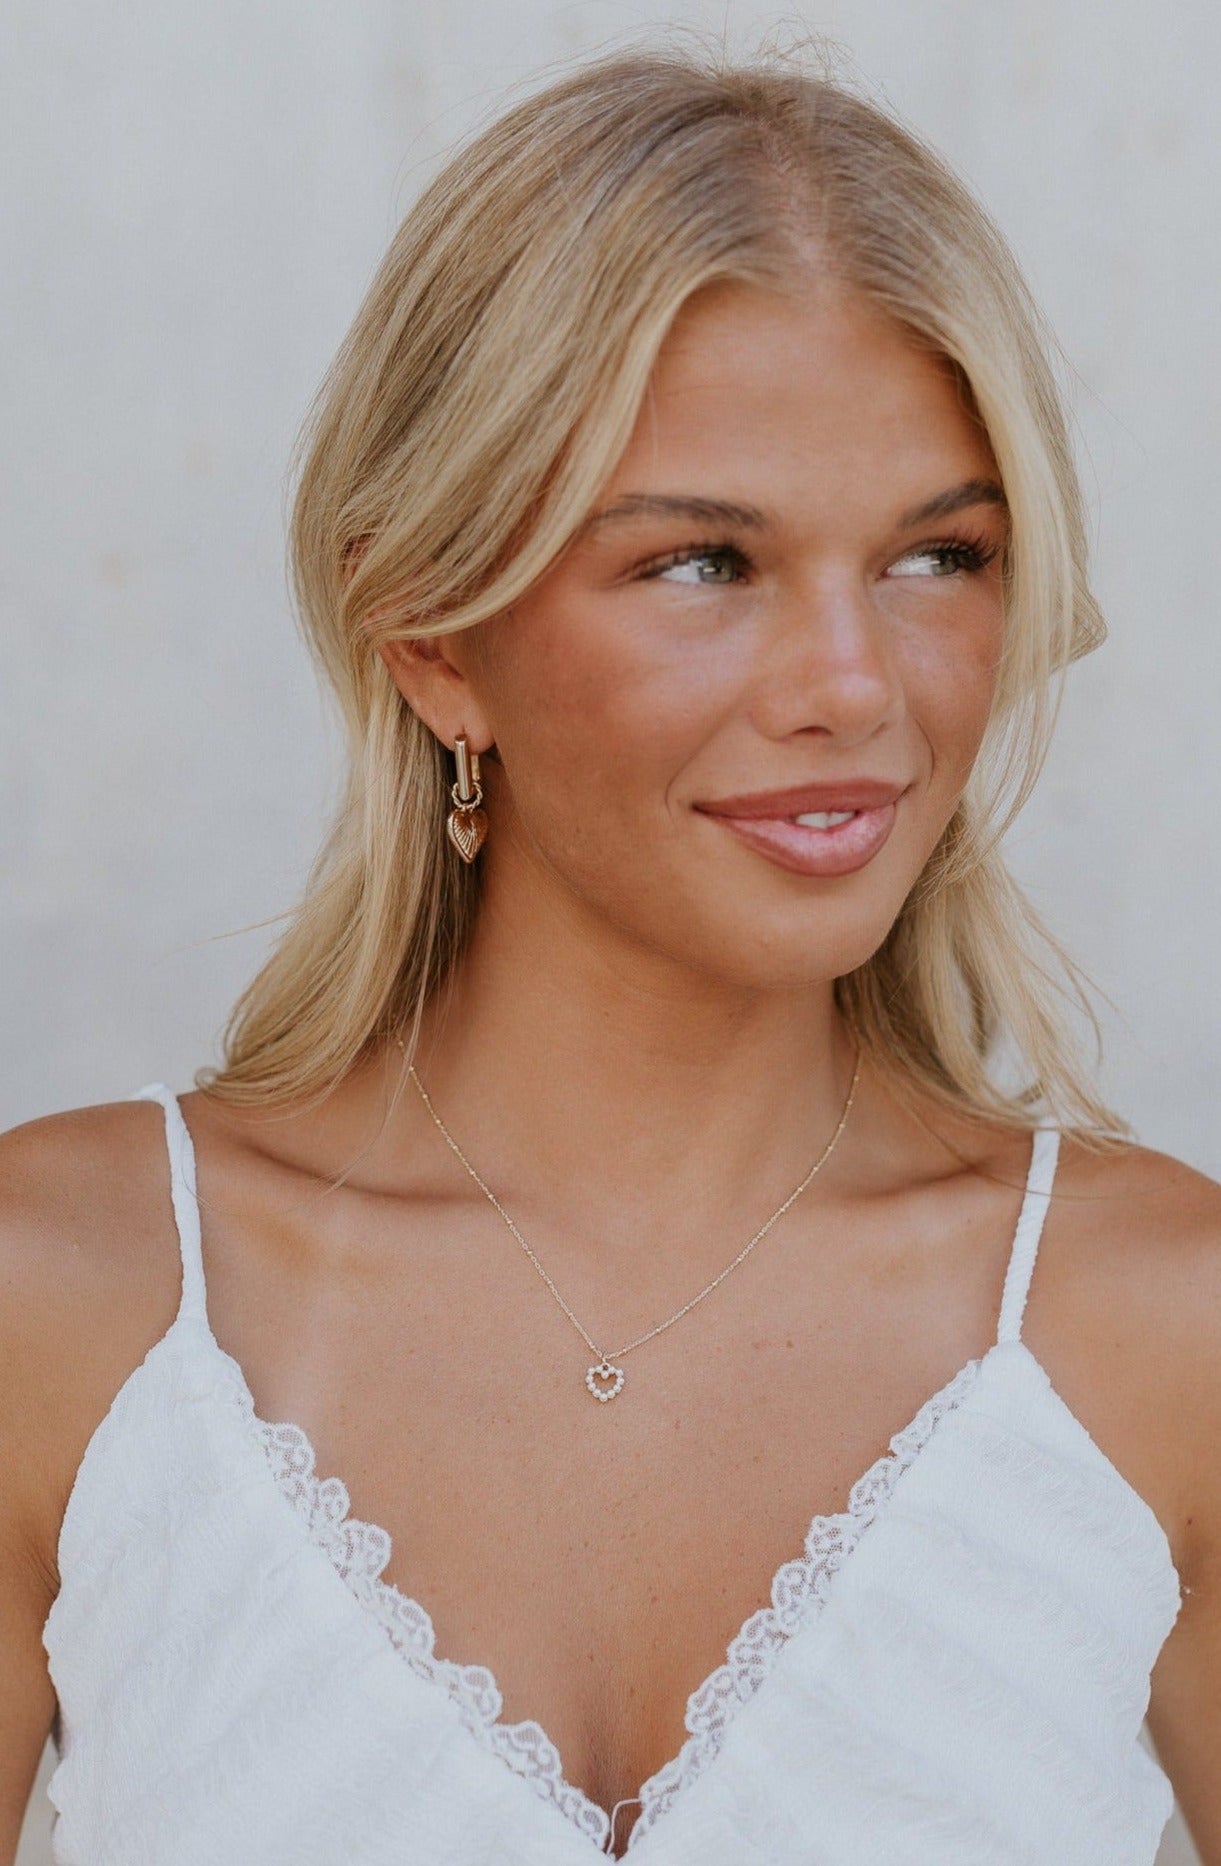 A model is shown shtraight-on wearing the Chloe Necklace.